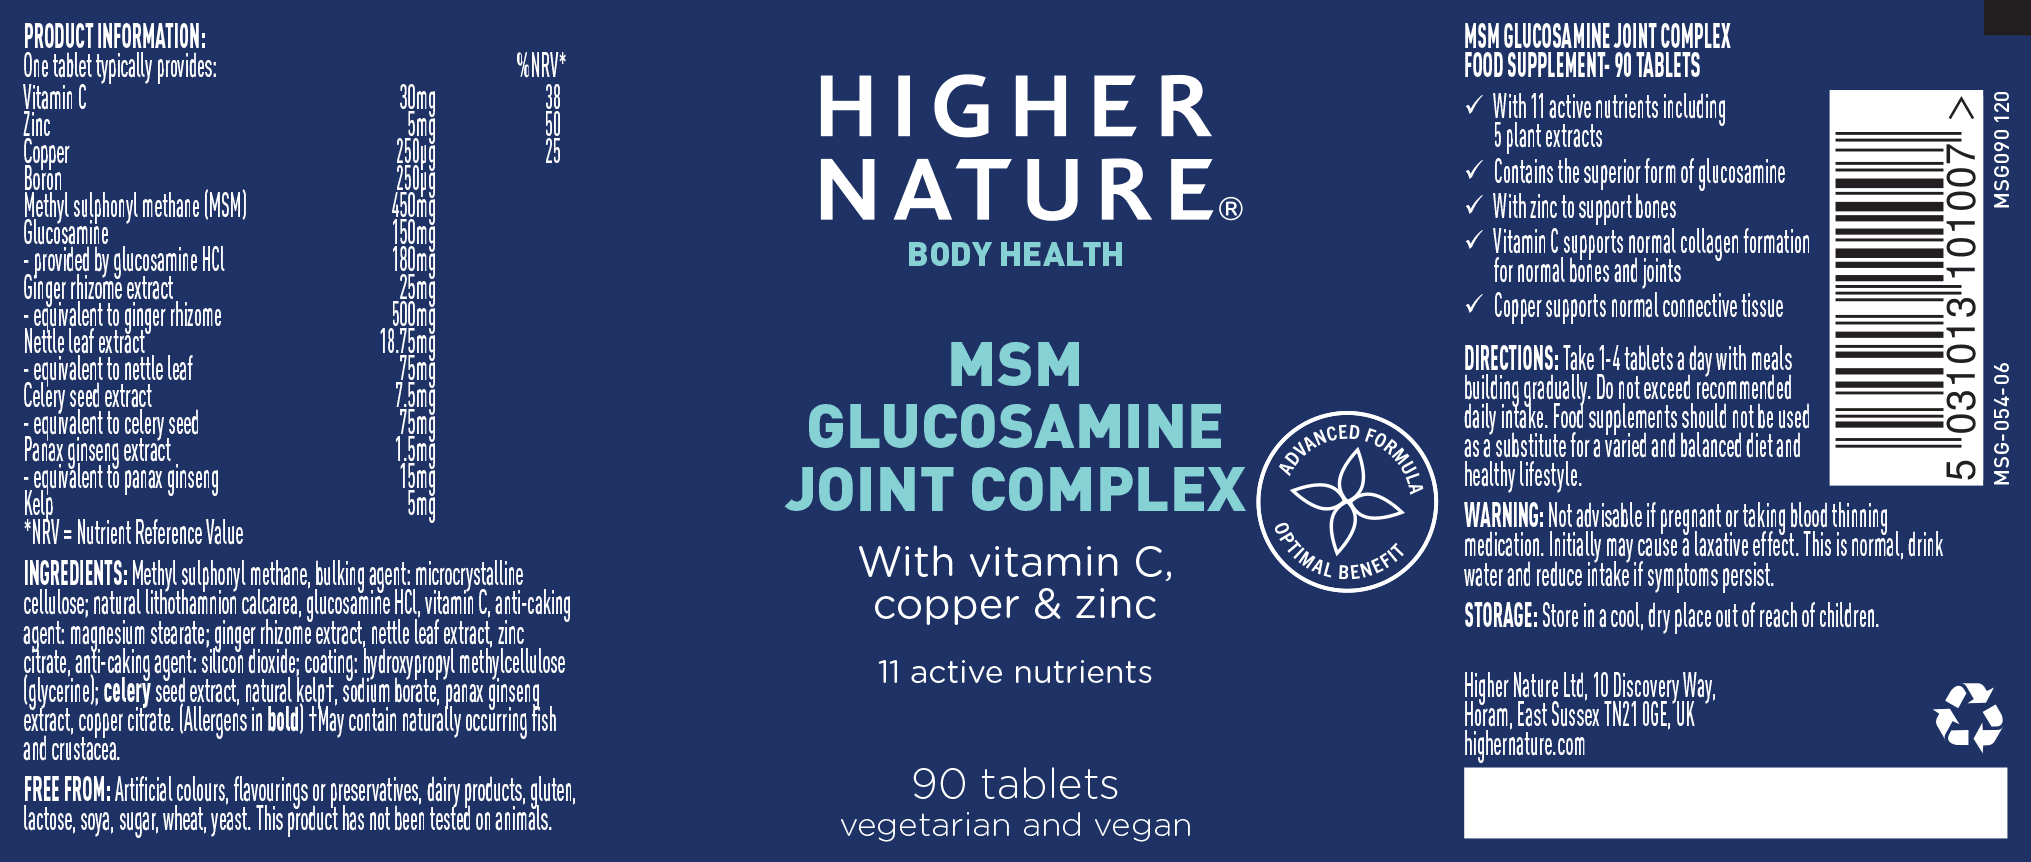 Higher Nature MSM Glucosamine Joint Complex 90's - Approved Vitamins